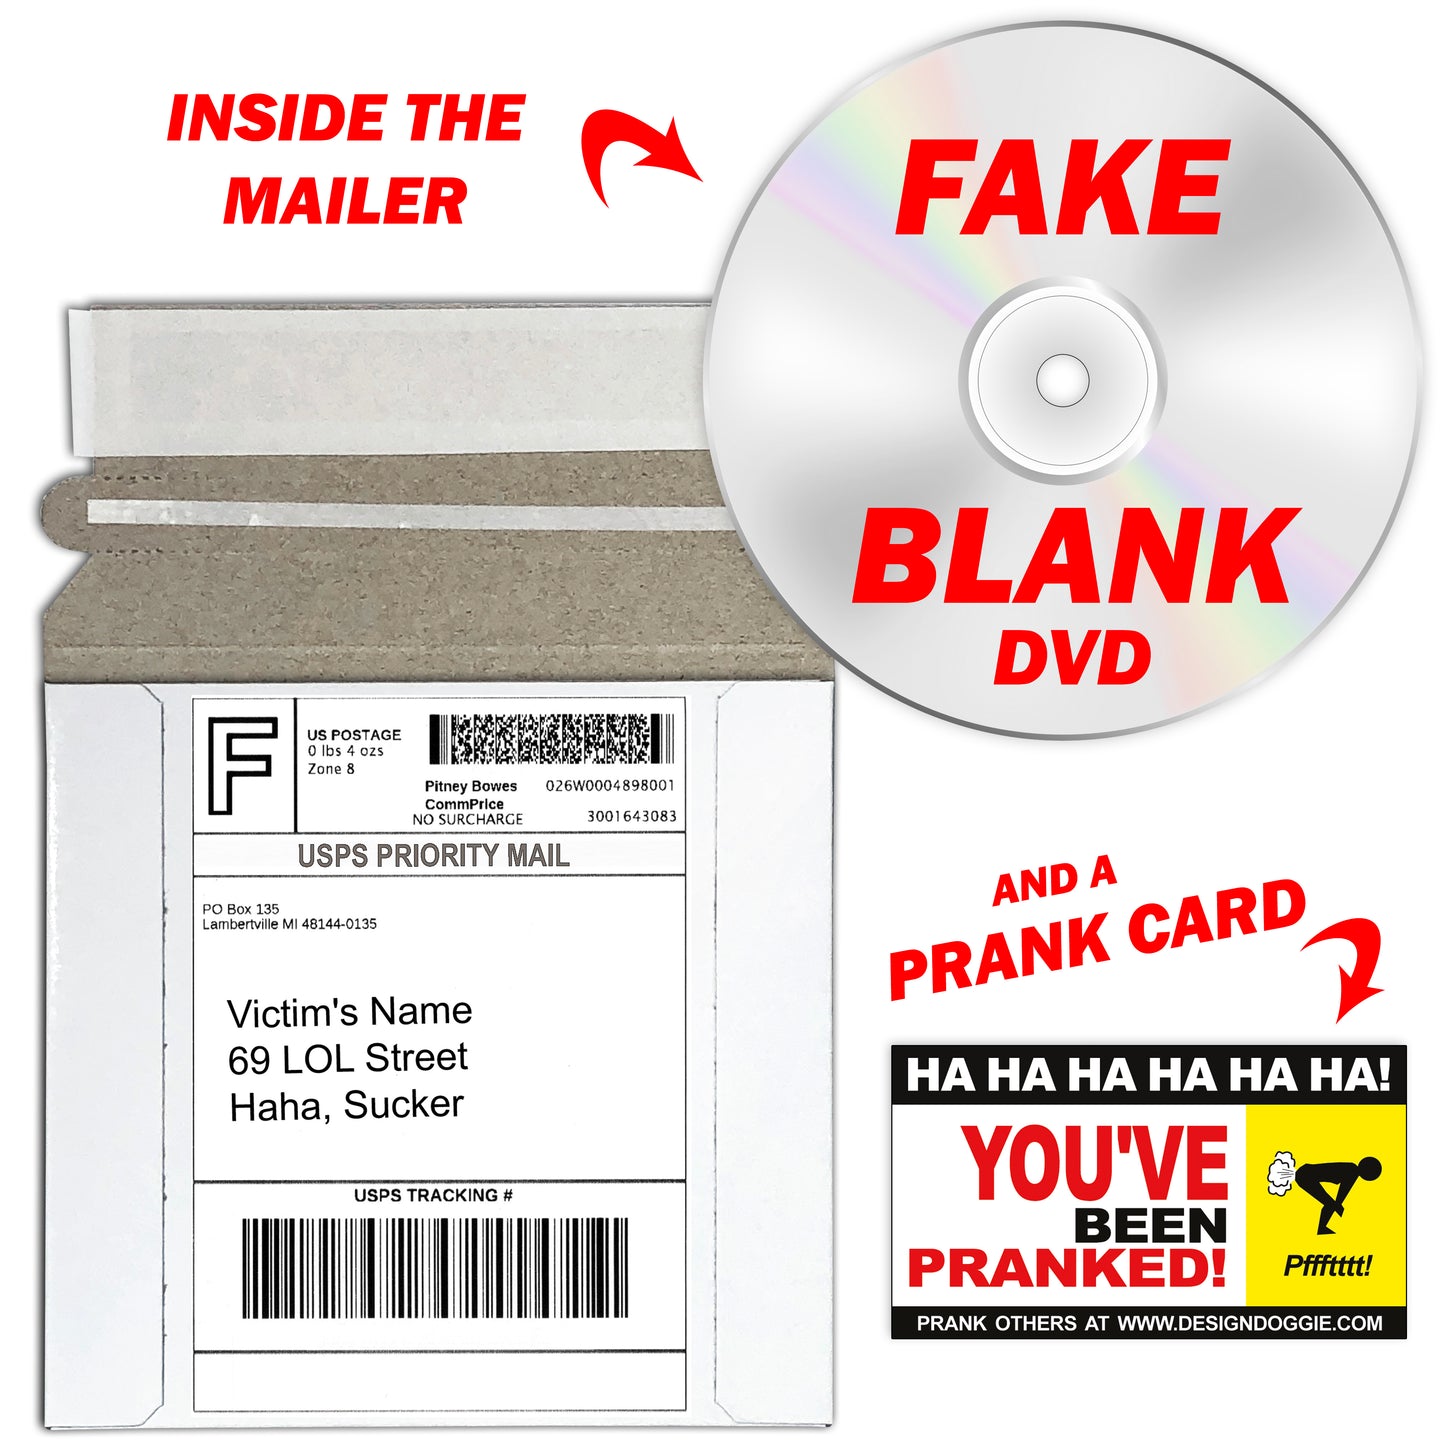 Silent Dog Farts Fake DVD mail prank gets sent directly to your victims 100% anonymously!